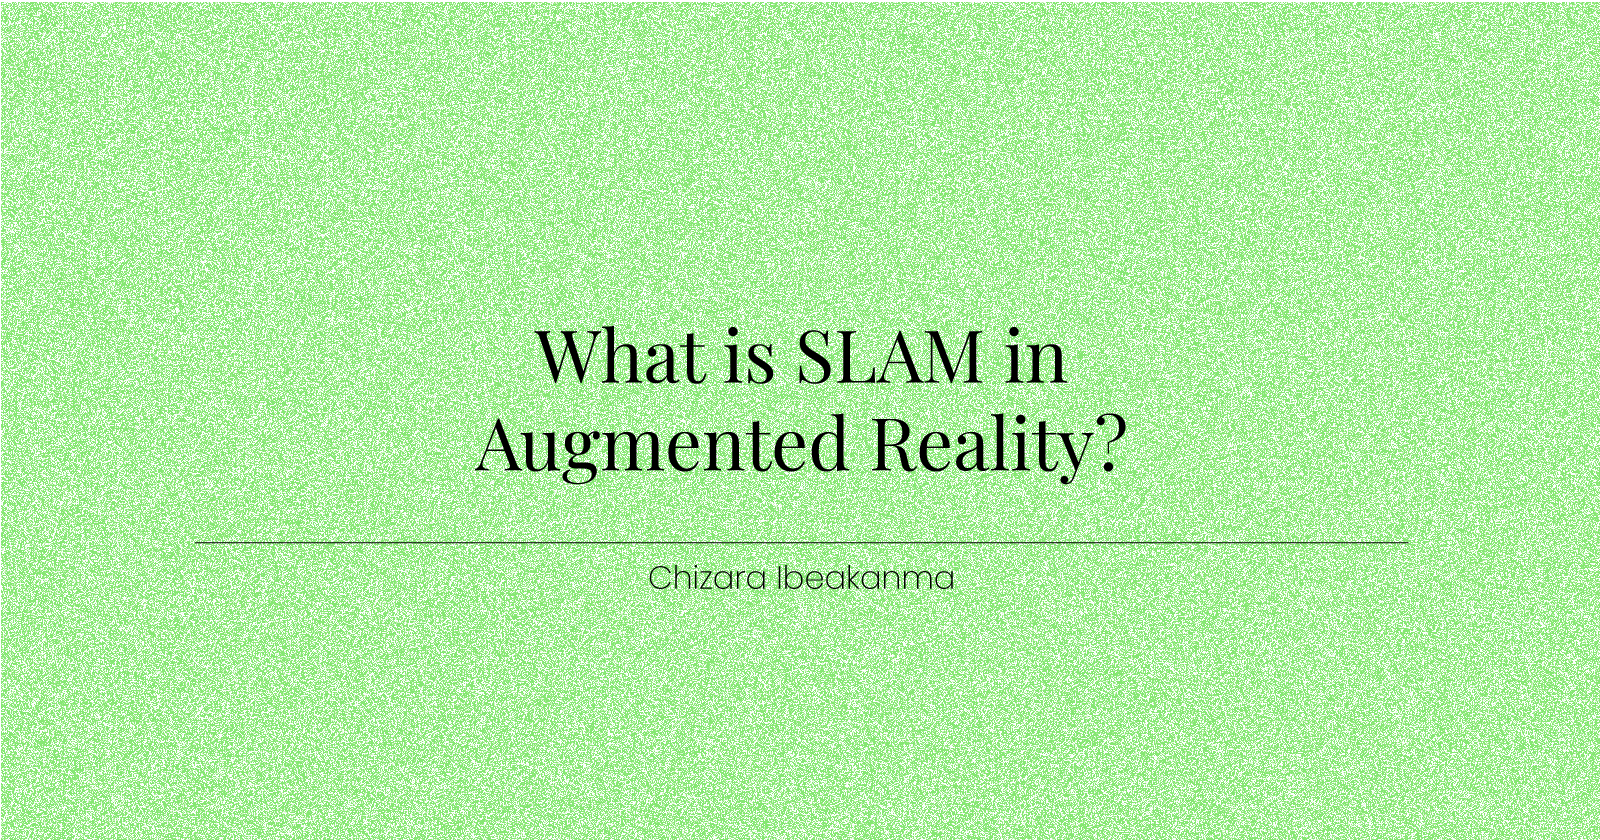 What Is SLAM in Augmented Reality?